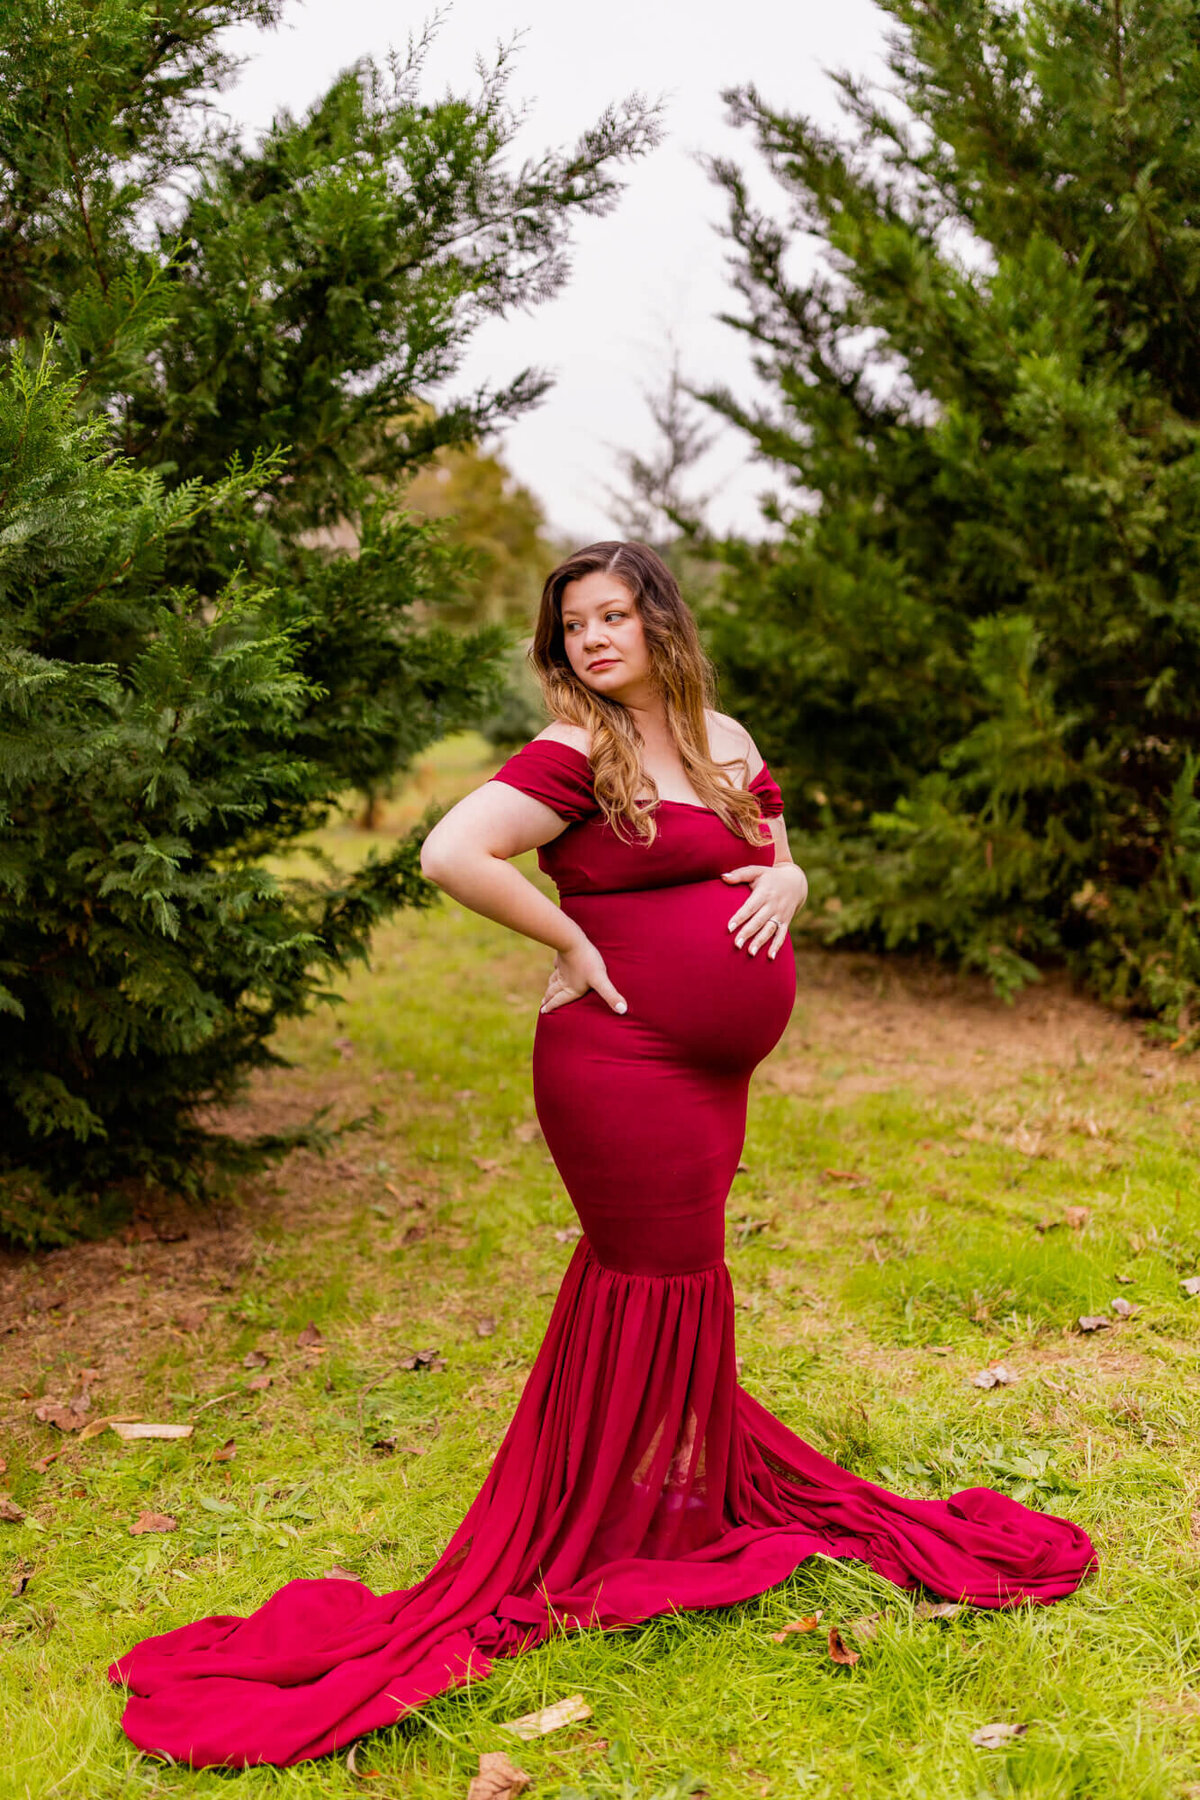 Pregnant mom in a maroon dress standing with some trees